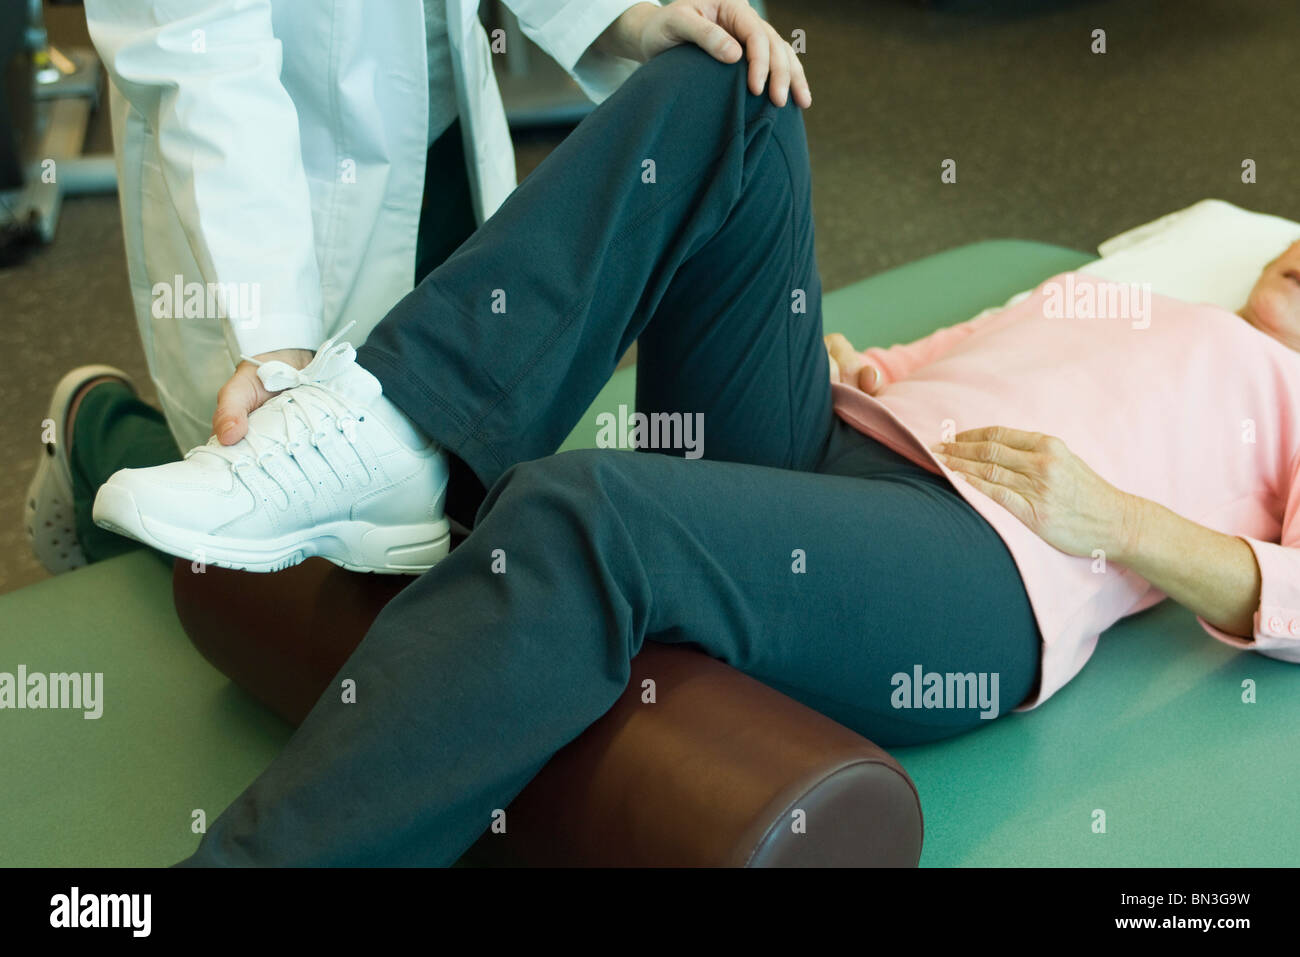 Patient receiving physical therapy treatment Stock Photo